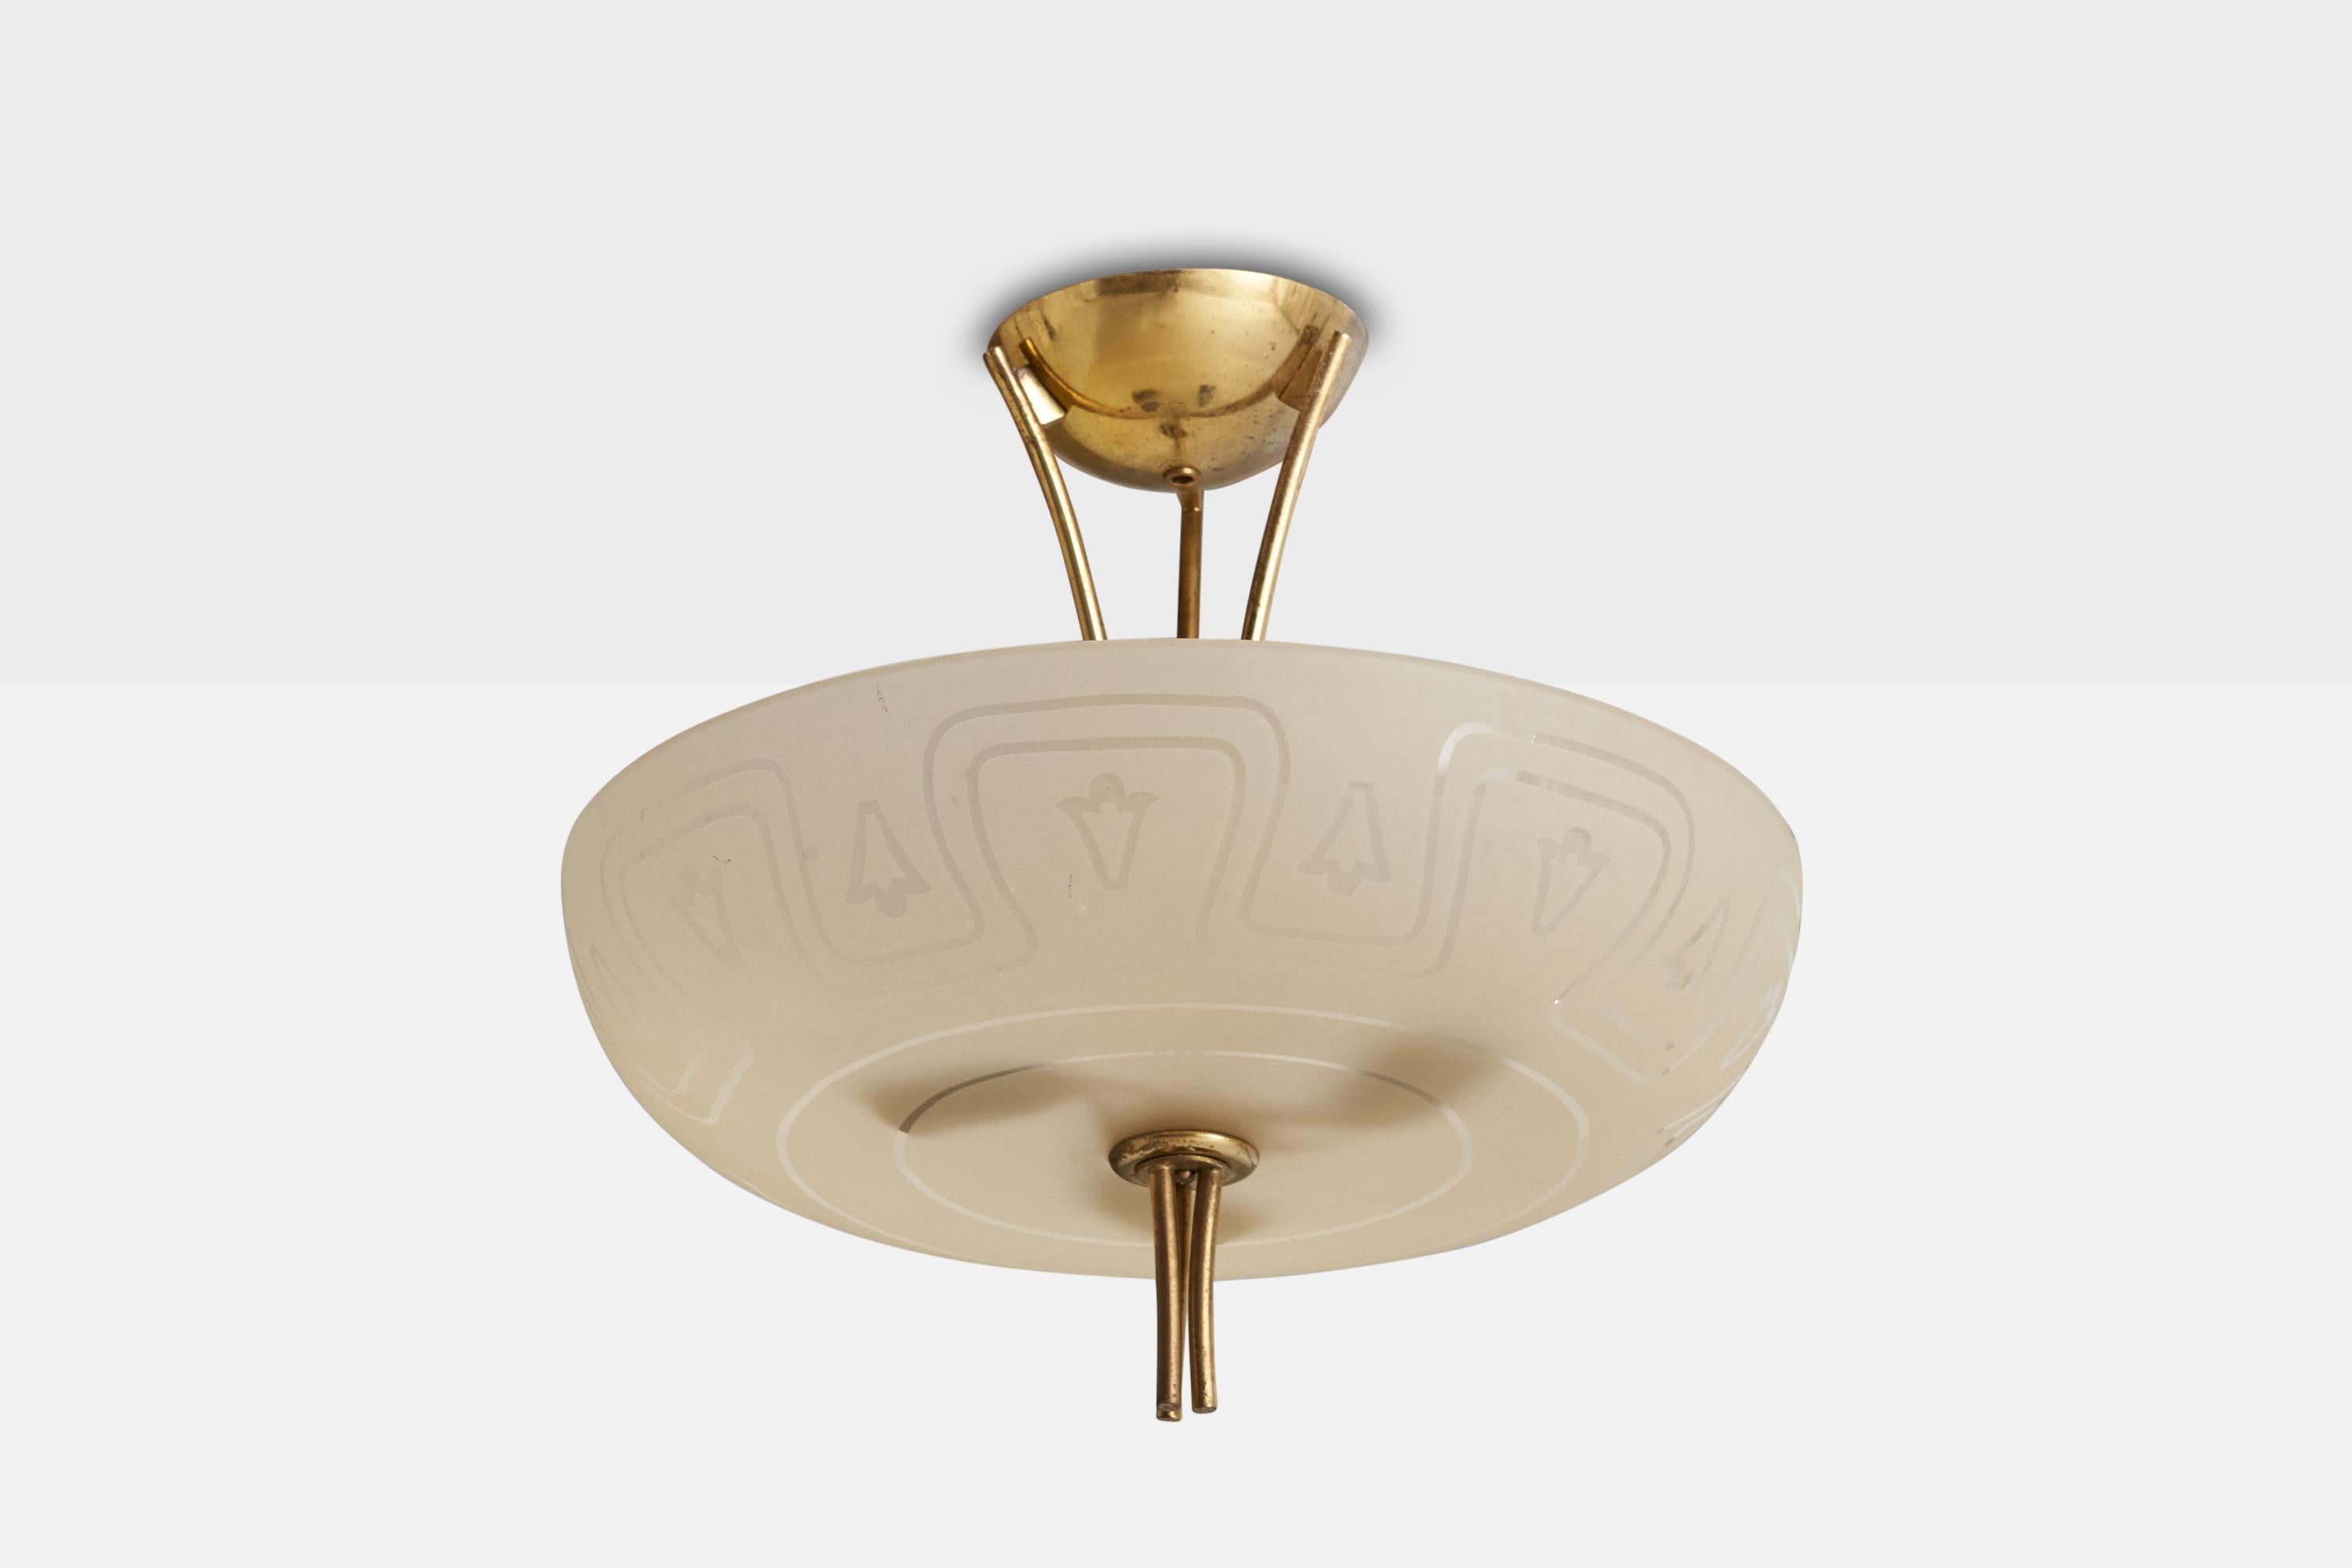 A brass and etched glass pendant light designed and produced in Sweden, c. 1950s.

Dimensions of canopy (inches): 4.92” H x 2.49” Diameter
Socket takes standard E-26 bulbs. 3 socket.There is no maximum wattage stated on the fixture. All lighting